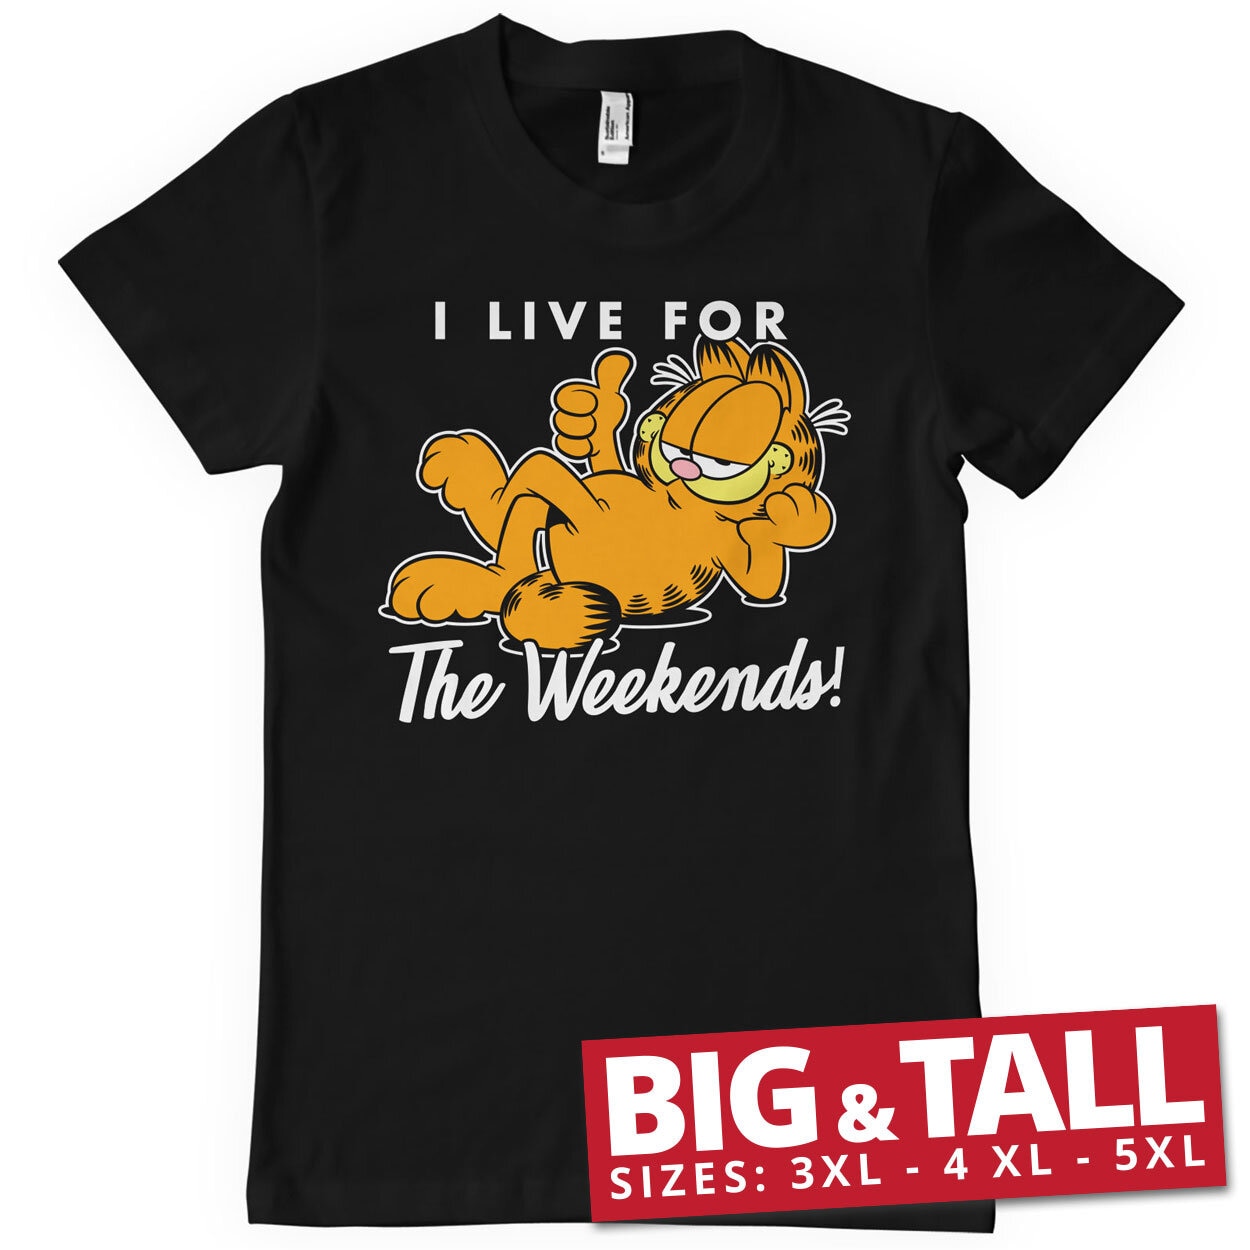 Garfield - Live For The Weekend Big & Tall T-Shirt